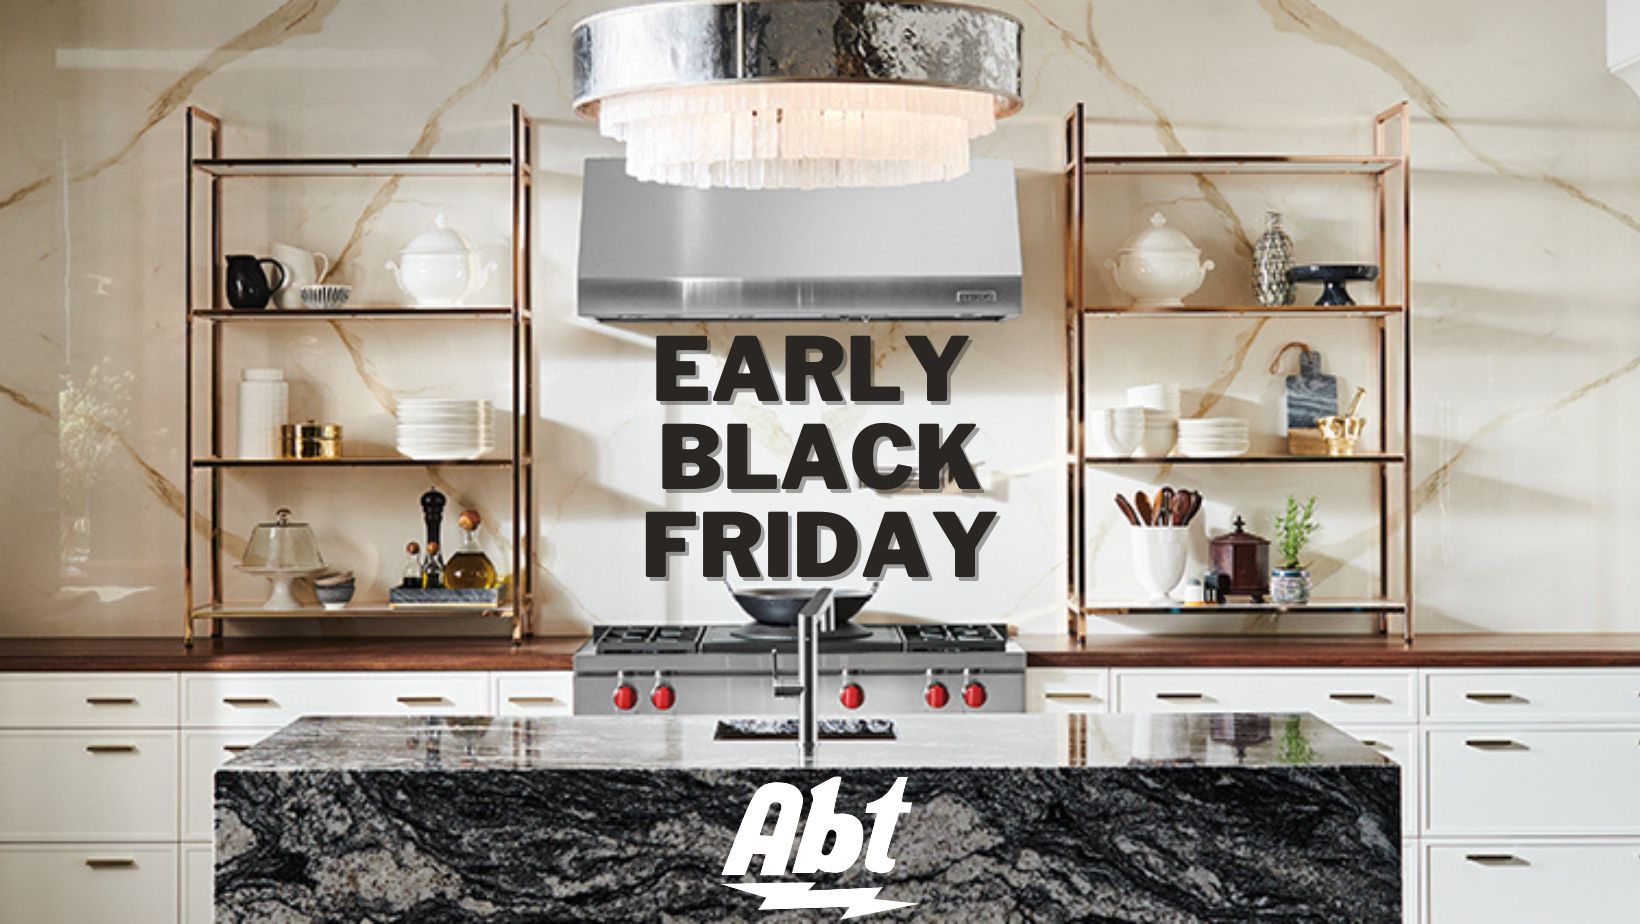 Surprise! Abt's Black Friday Sale is Here The Bolt